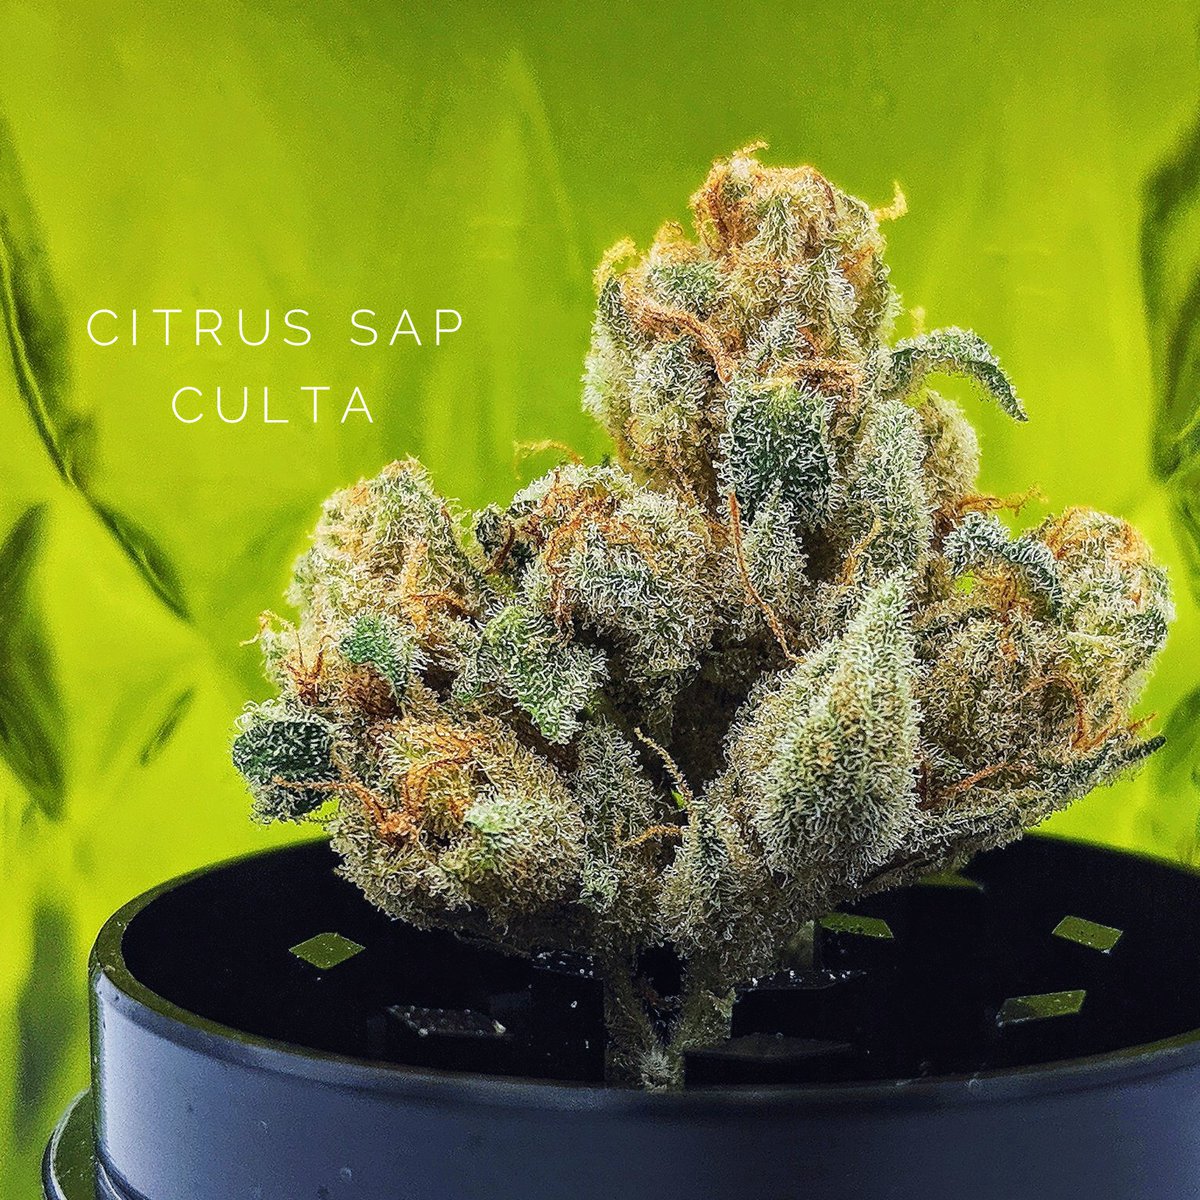 Super Sativa 🔥🌿🦍 CITRUS SAP - GG4 x TANGIE 🍊💚🔥 Culta Cannabis 🌿 MD HEADY and SLIGHTLY PSYCHEDELIC 😎👏 #cannabisculture #cannabisart